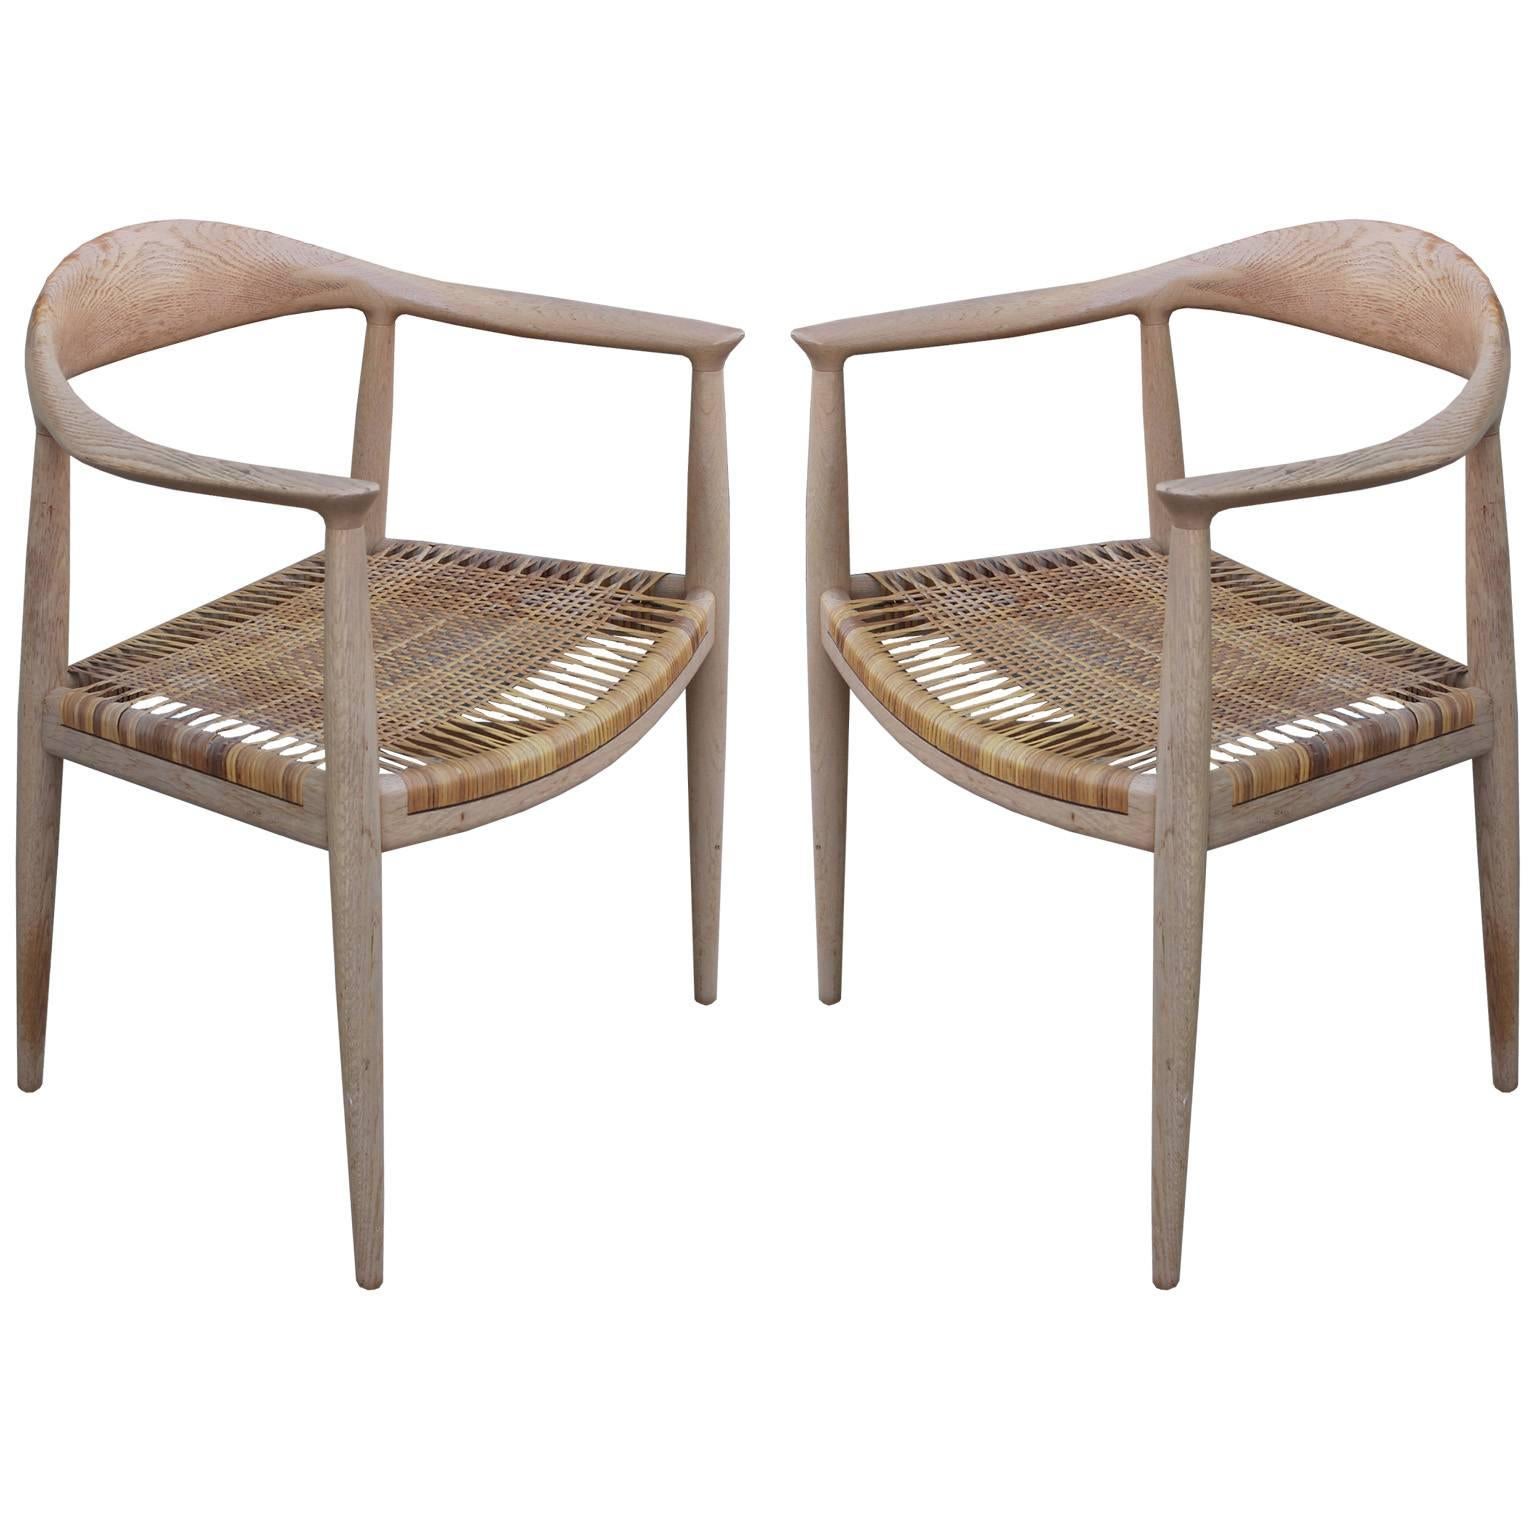 Pair of Early Modern Hans Wegner "The Chair" Chairs Bleached Wood and Woven Cane